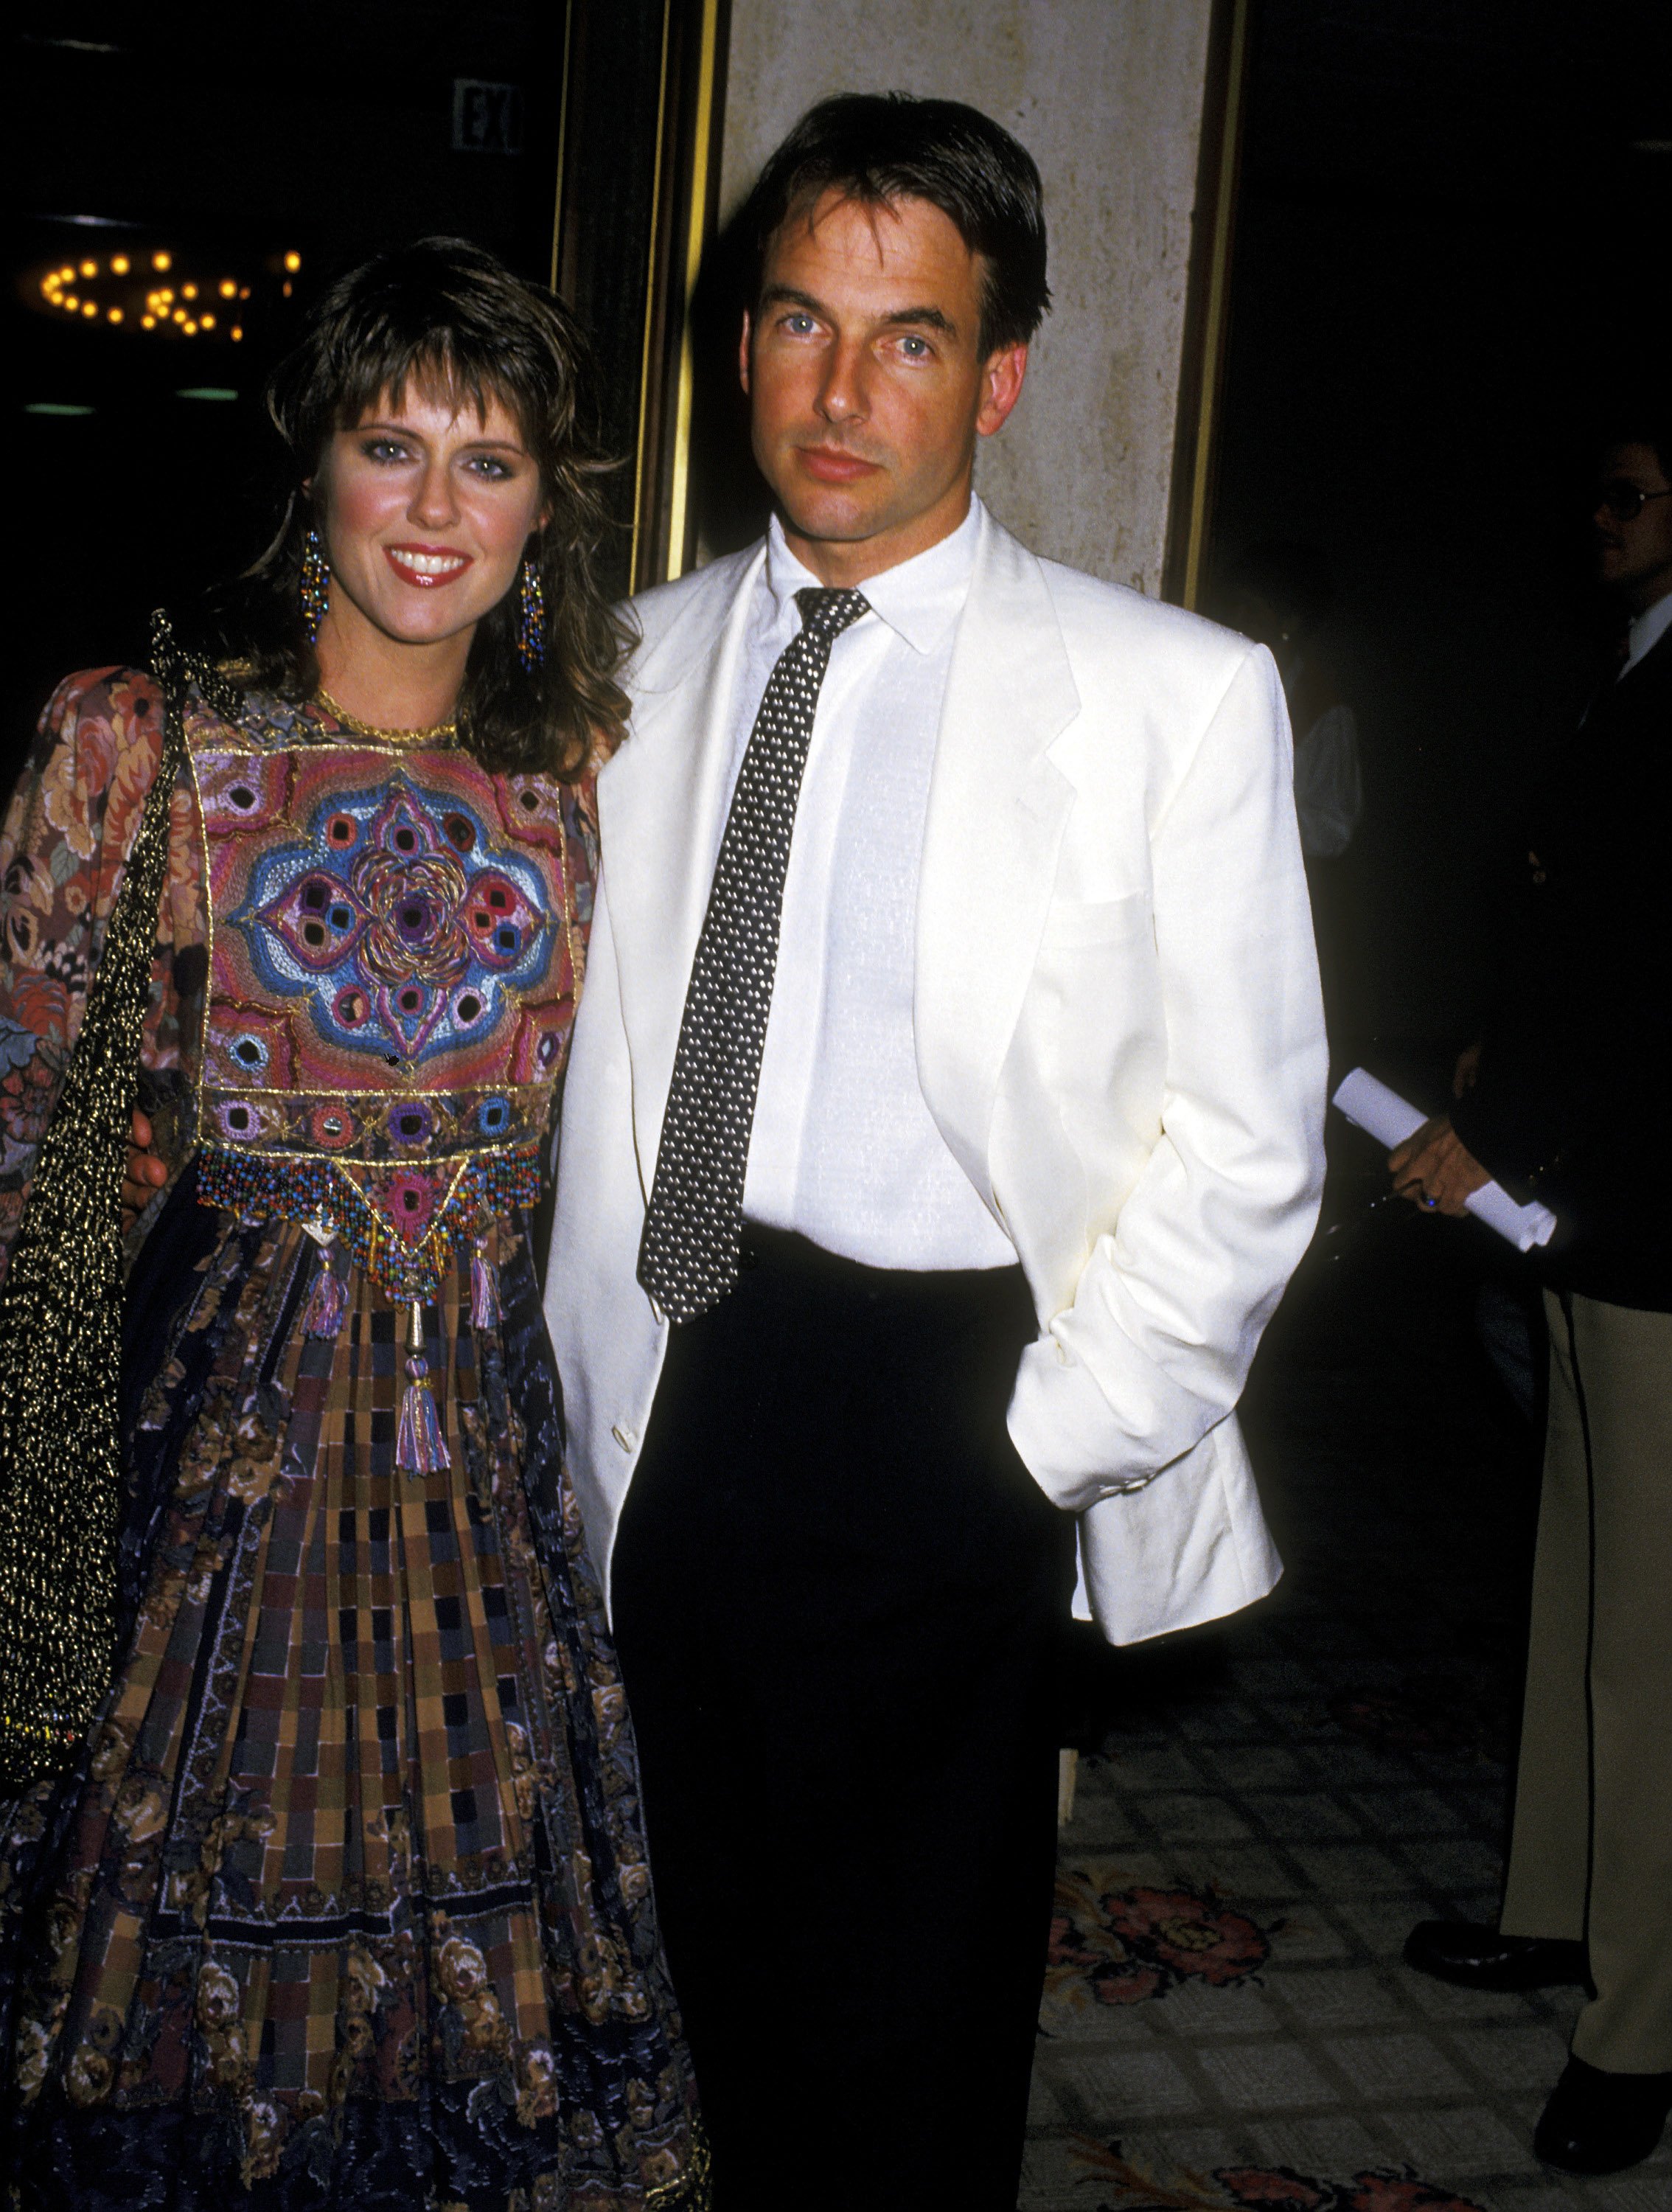 Pam Dawber and Mark Harmon during the "Dr. Dolittle" premiere in New York City, New York, United States. | Source: Getty Images